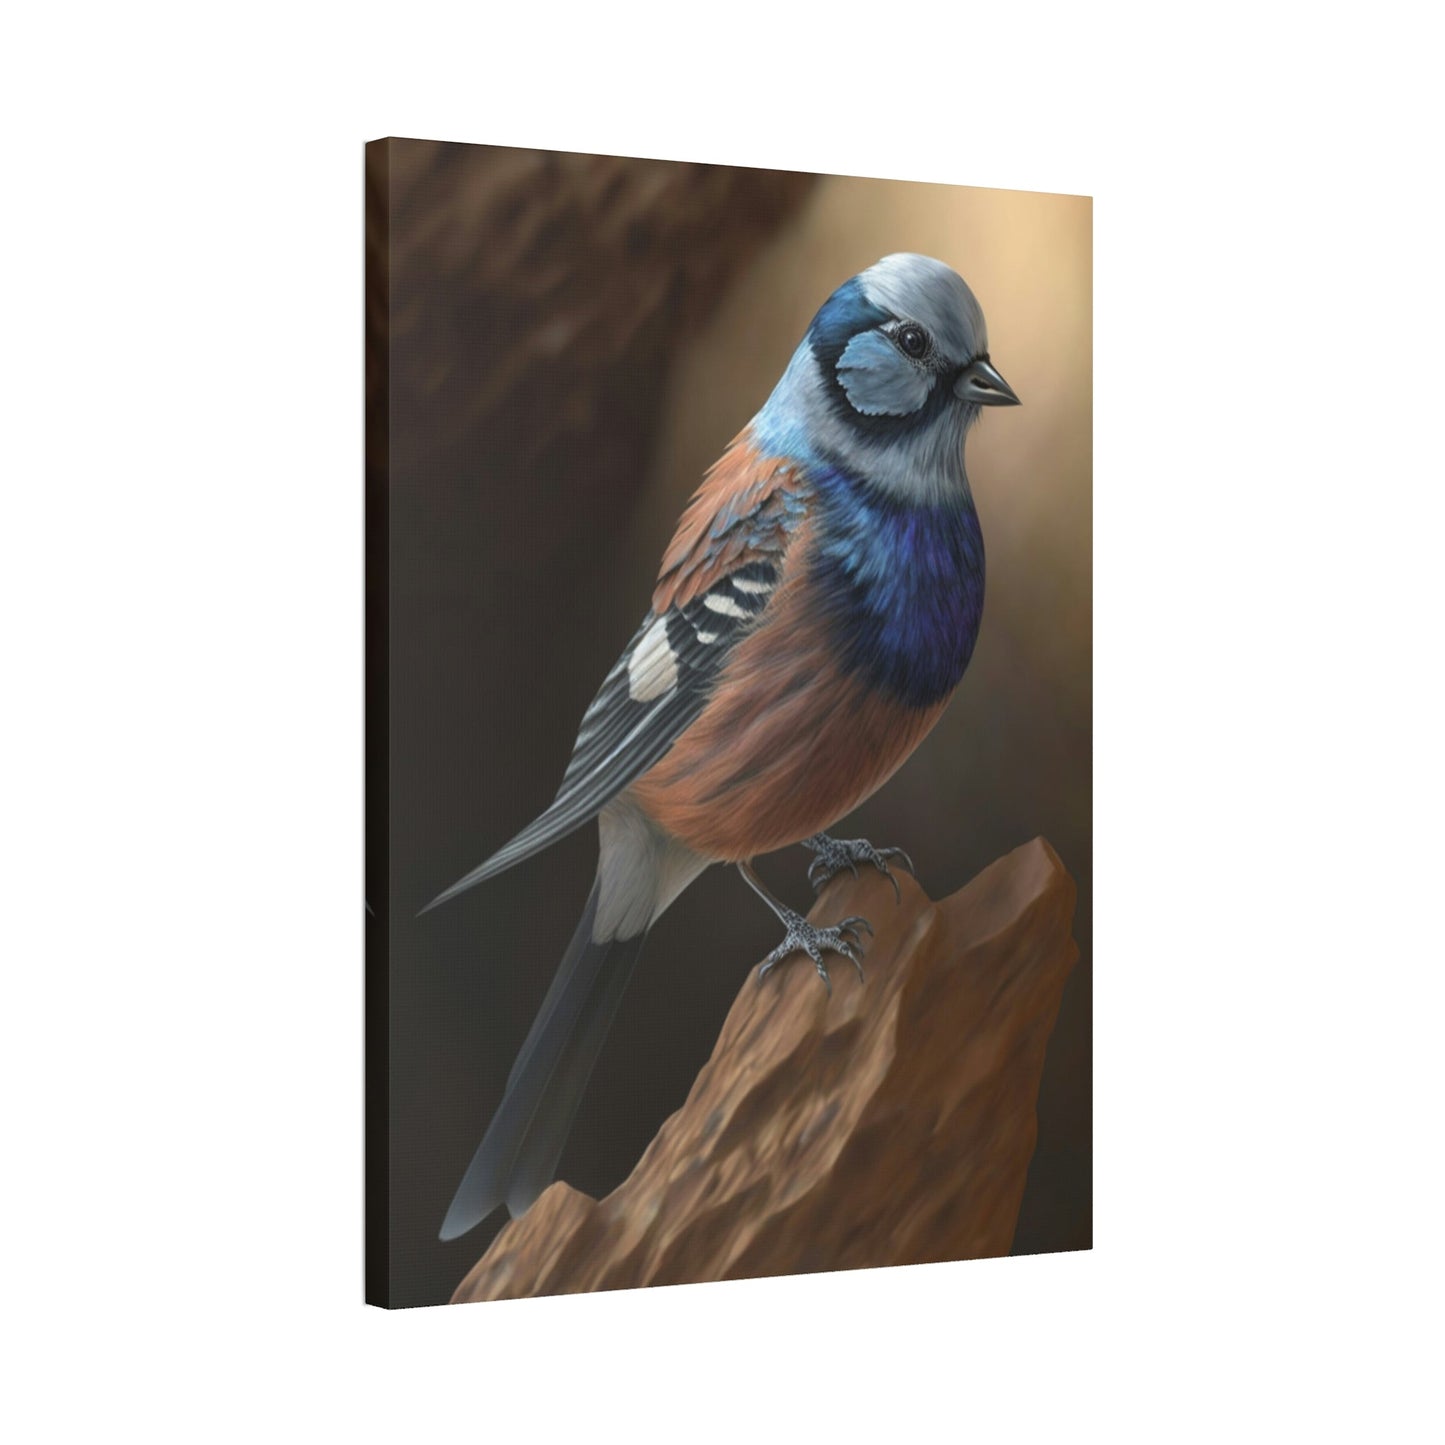 The Rainbow of Feathers: A Print on Canvas & Poster of Birds with Vivid Colors